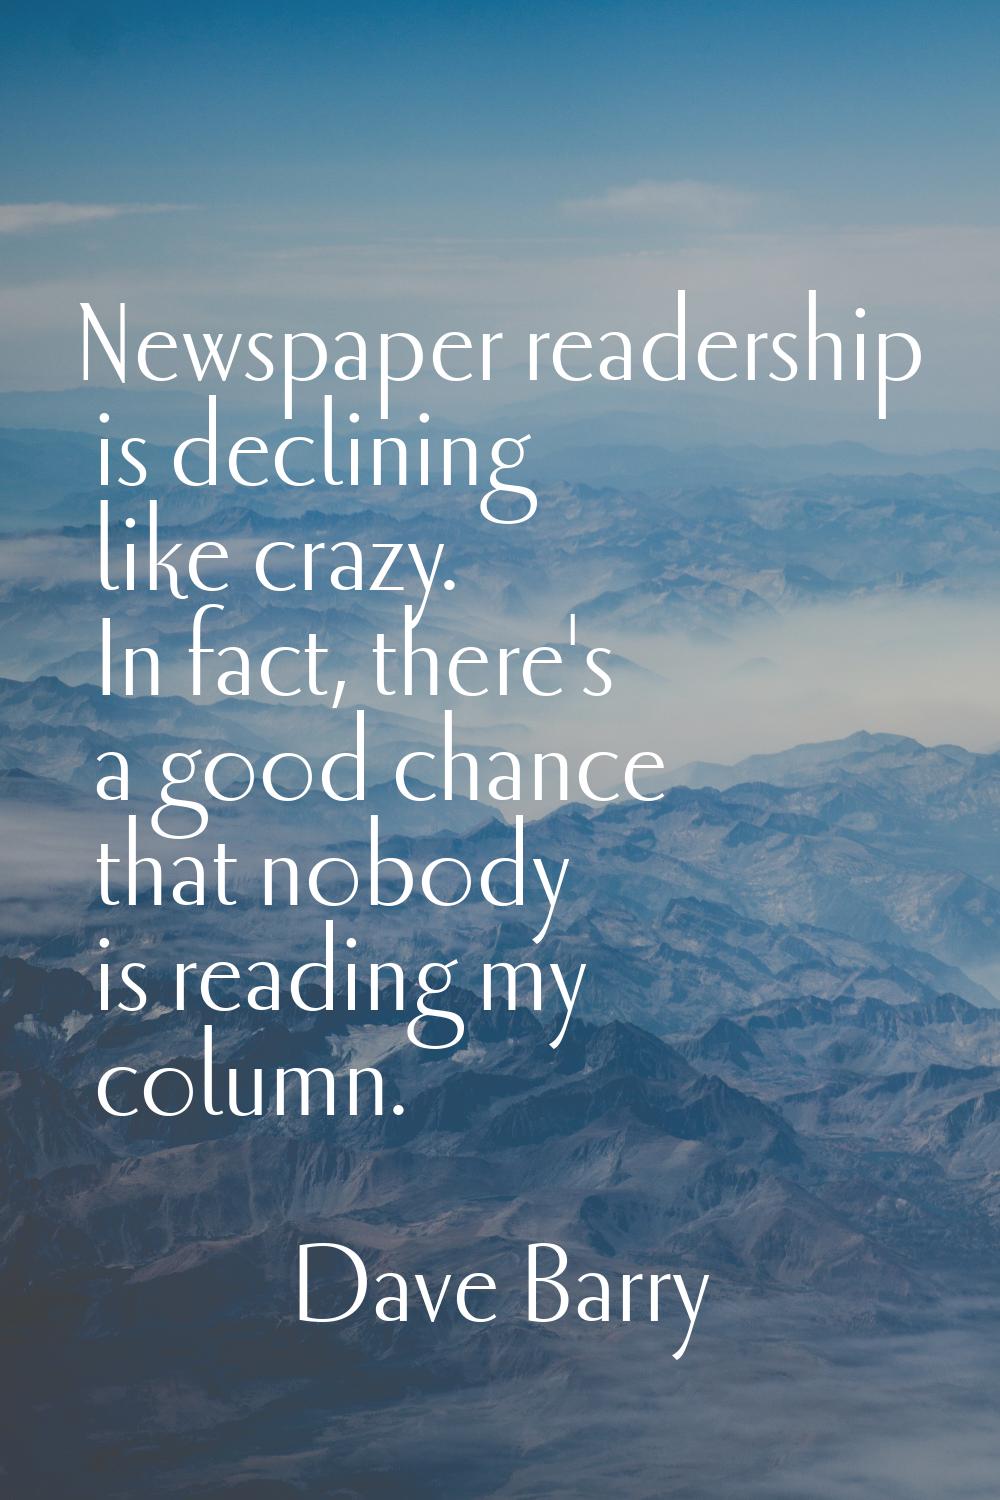 Newspaper readership is declining like crazy. In fact, there's a good chance that nobody is reading